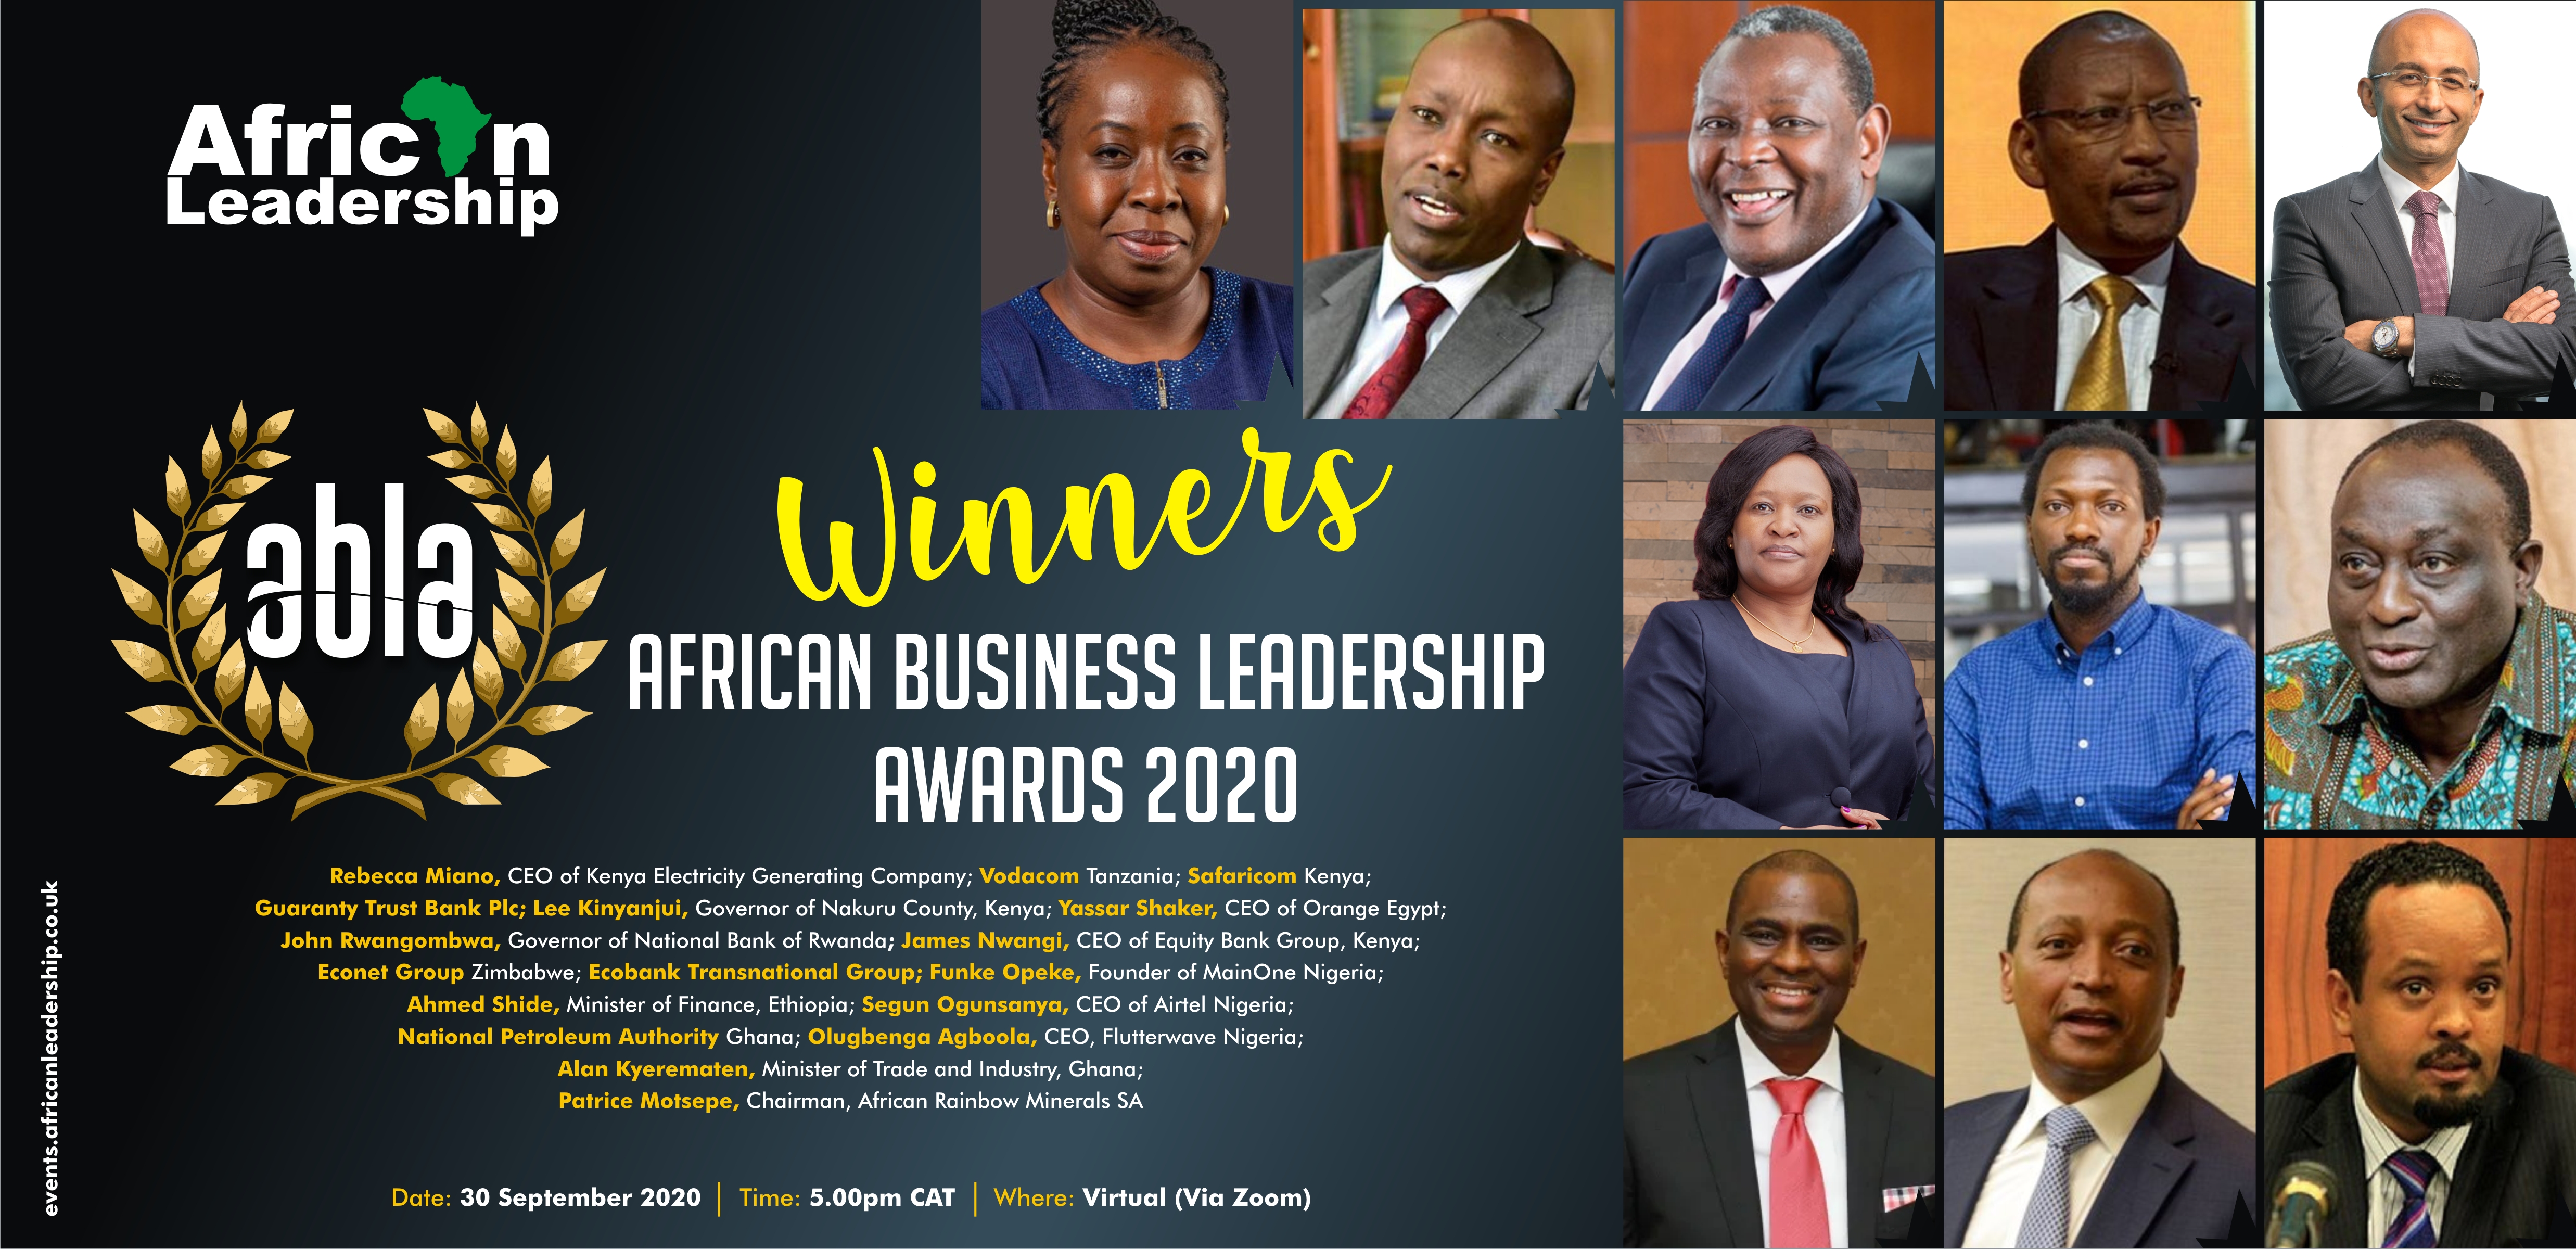 BREAKING: African Leadership Magazine Unveils Winners for The African Business Leadership Awards 2020